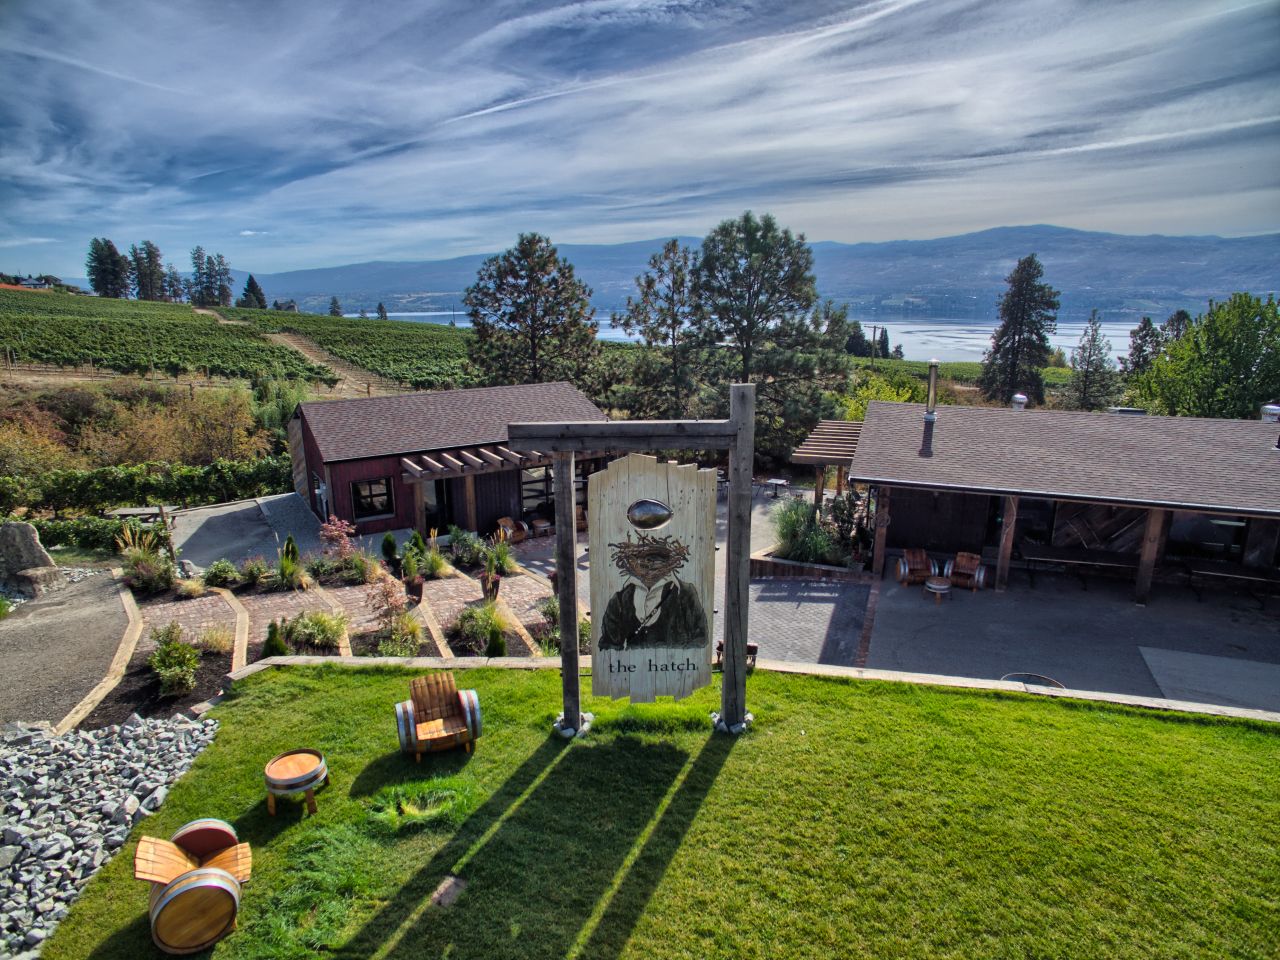 The Hatch in West Kelowna, British Columbia, is one of more than 160 wineries in the Okanagan Valley.